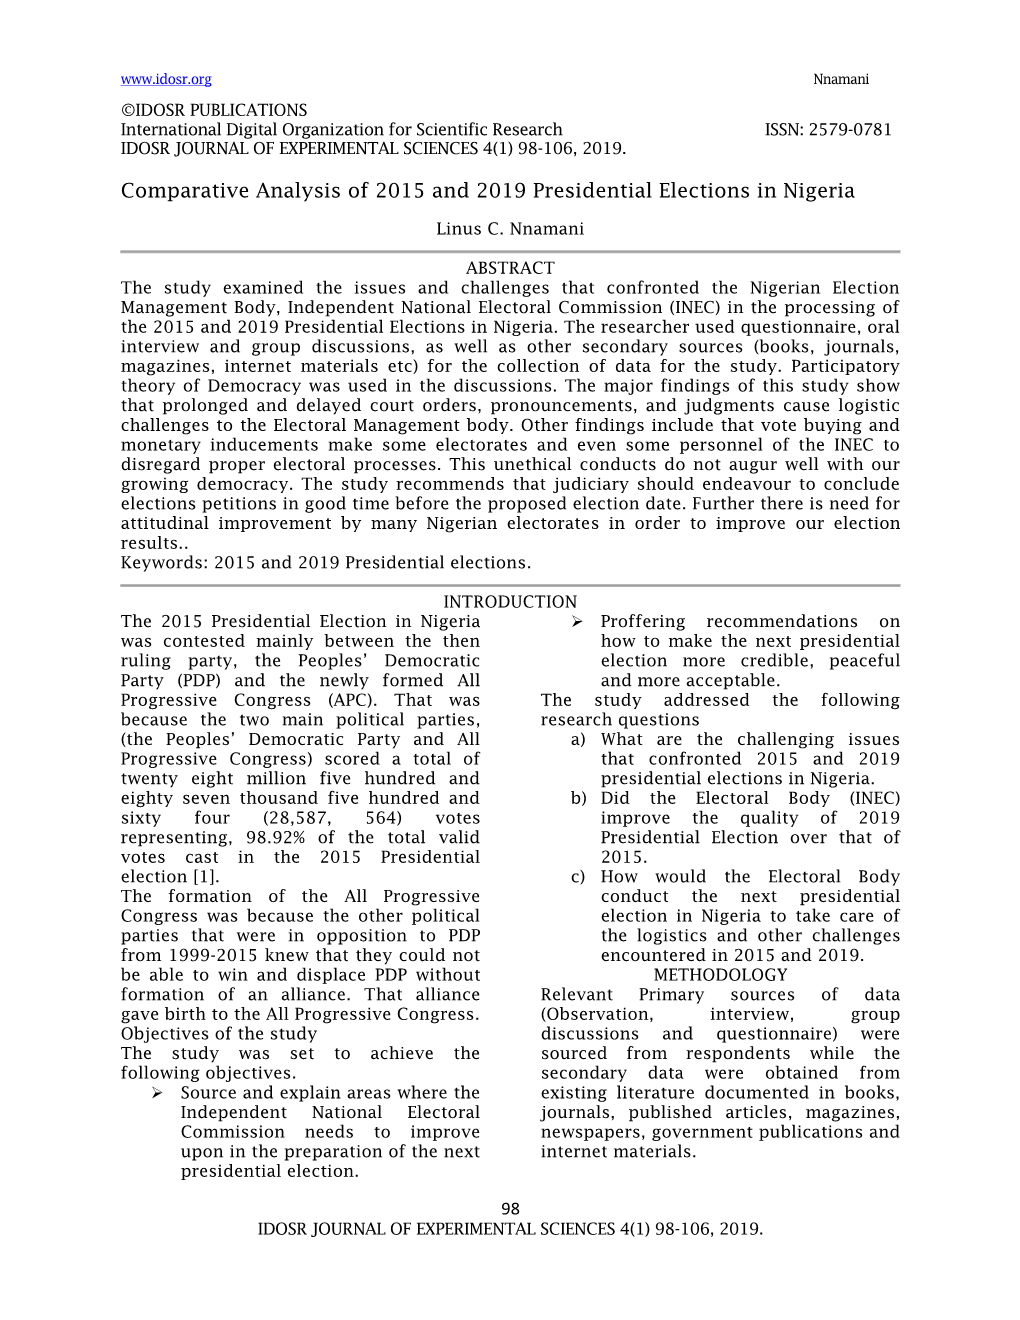 Comparative Analysis of 2015 and 2019 Presidential Elections in Nigeria